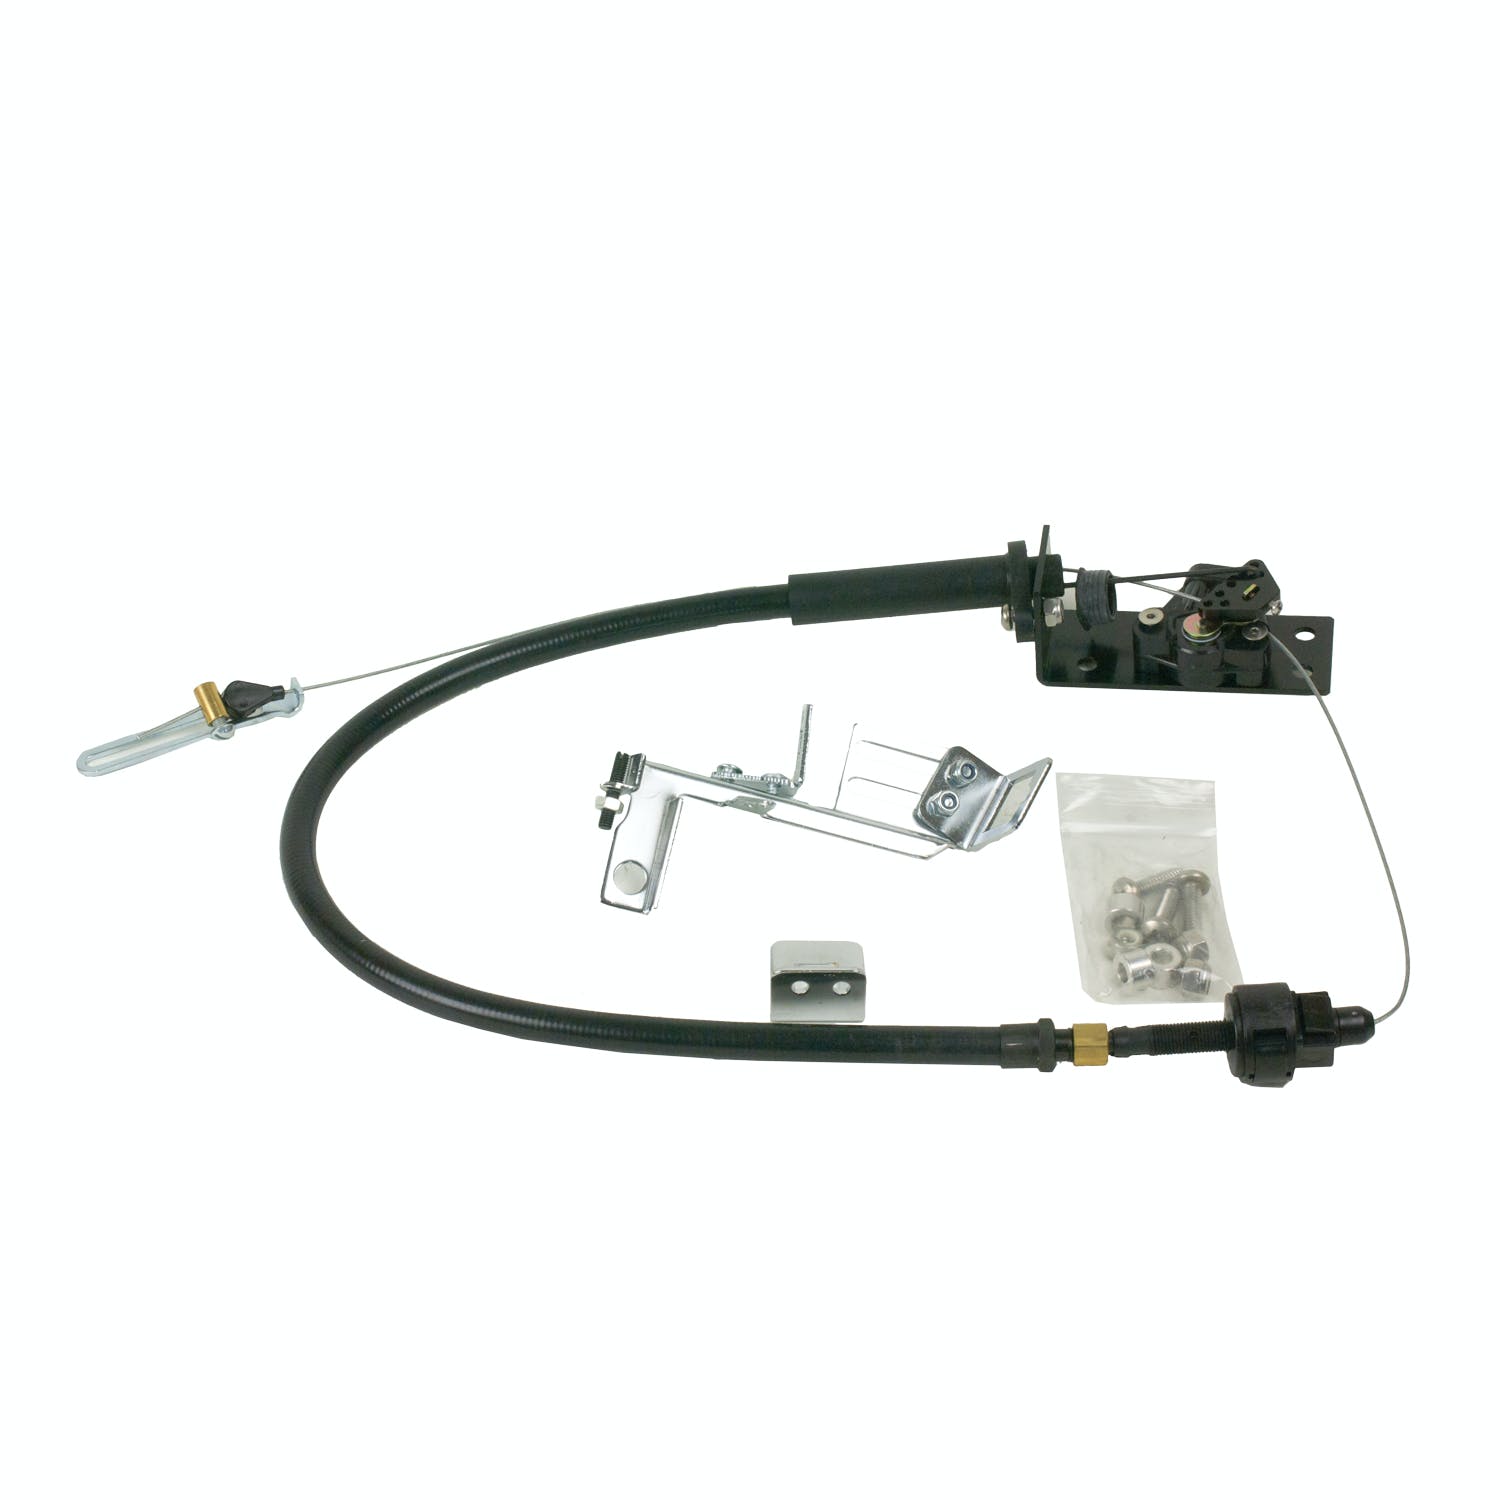 B&M 120002 TPS FOR CARBURETED KITS WORKS WITH